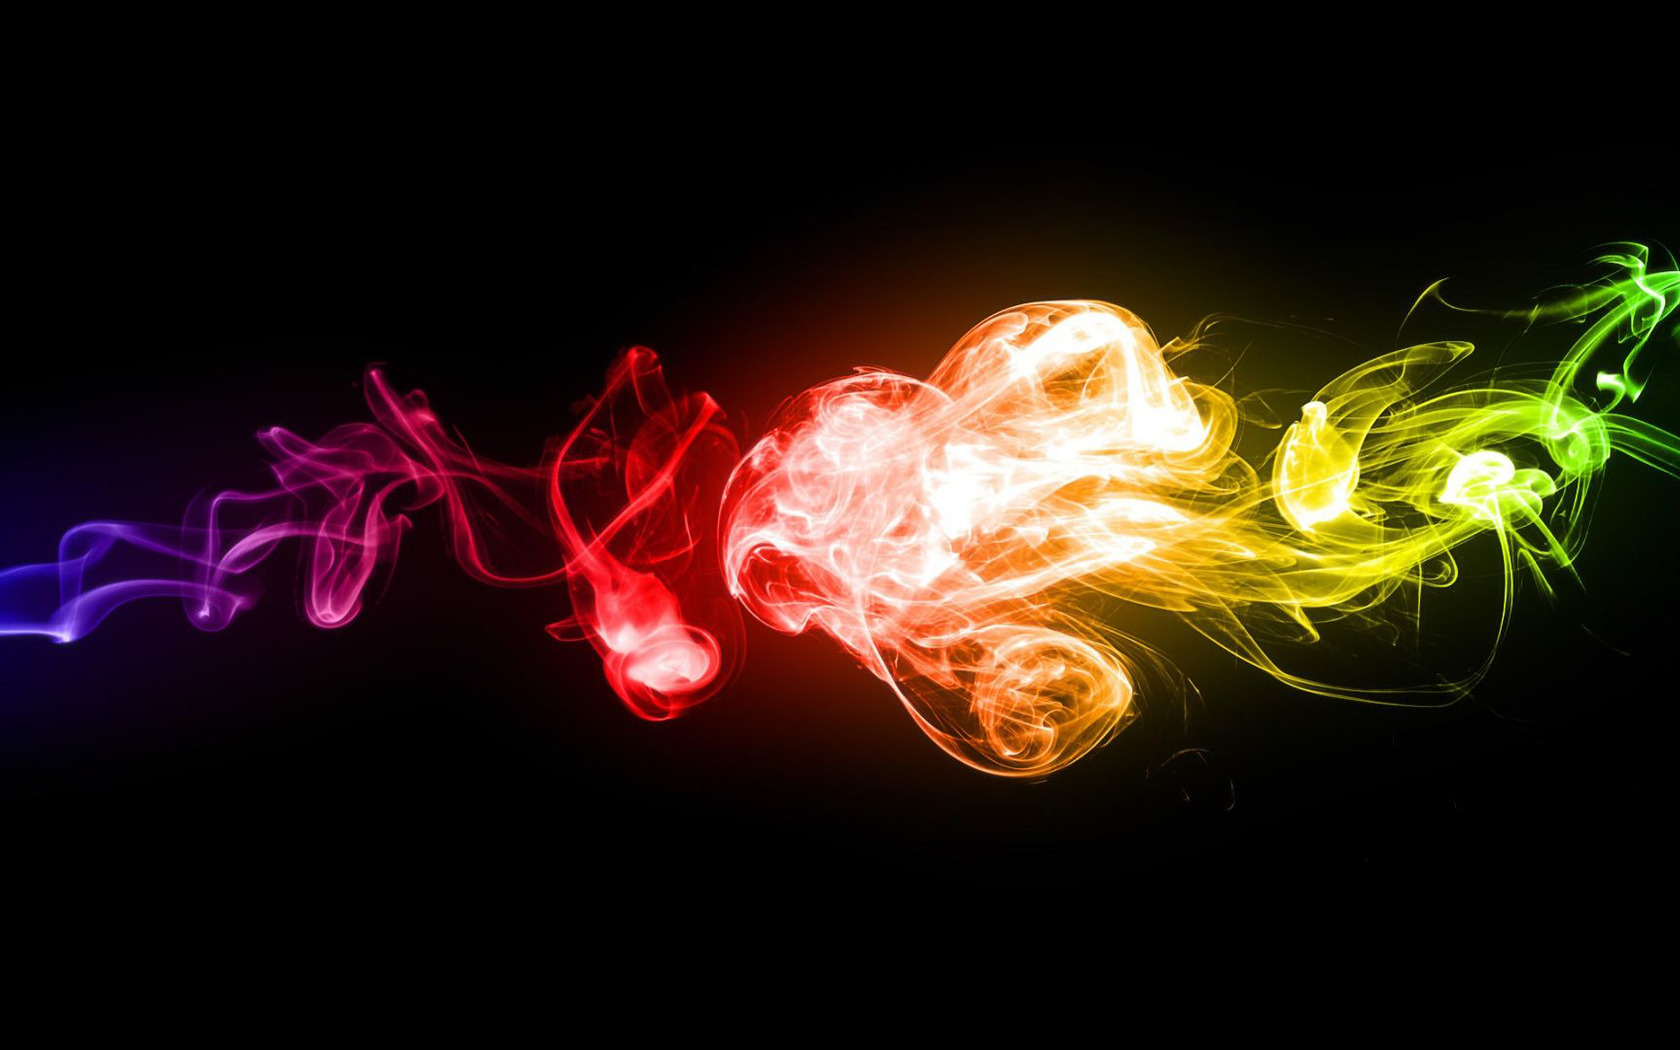 Free Download Colorful Smoke Wallpaper 6509 1680x1050 For Your Desktop Mobile Tablet Explore 46 Colorful Smoke Wallpaper Blue Smoke Wallpaper Black Smoke Wallpaper Red Smoke Wallpapers